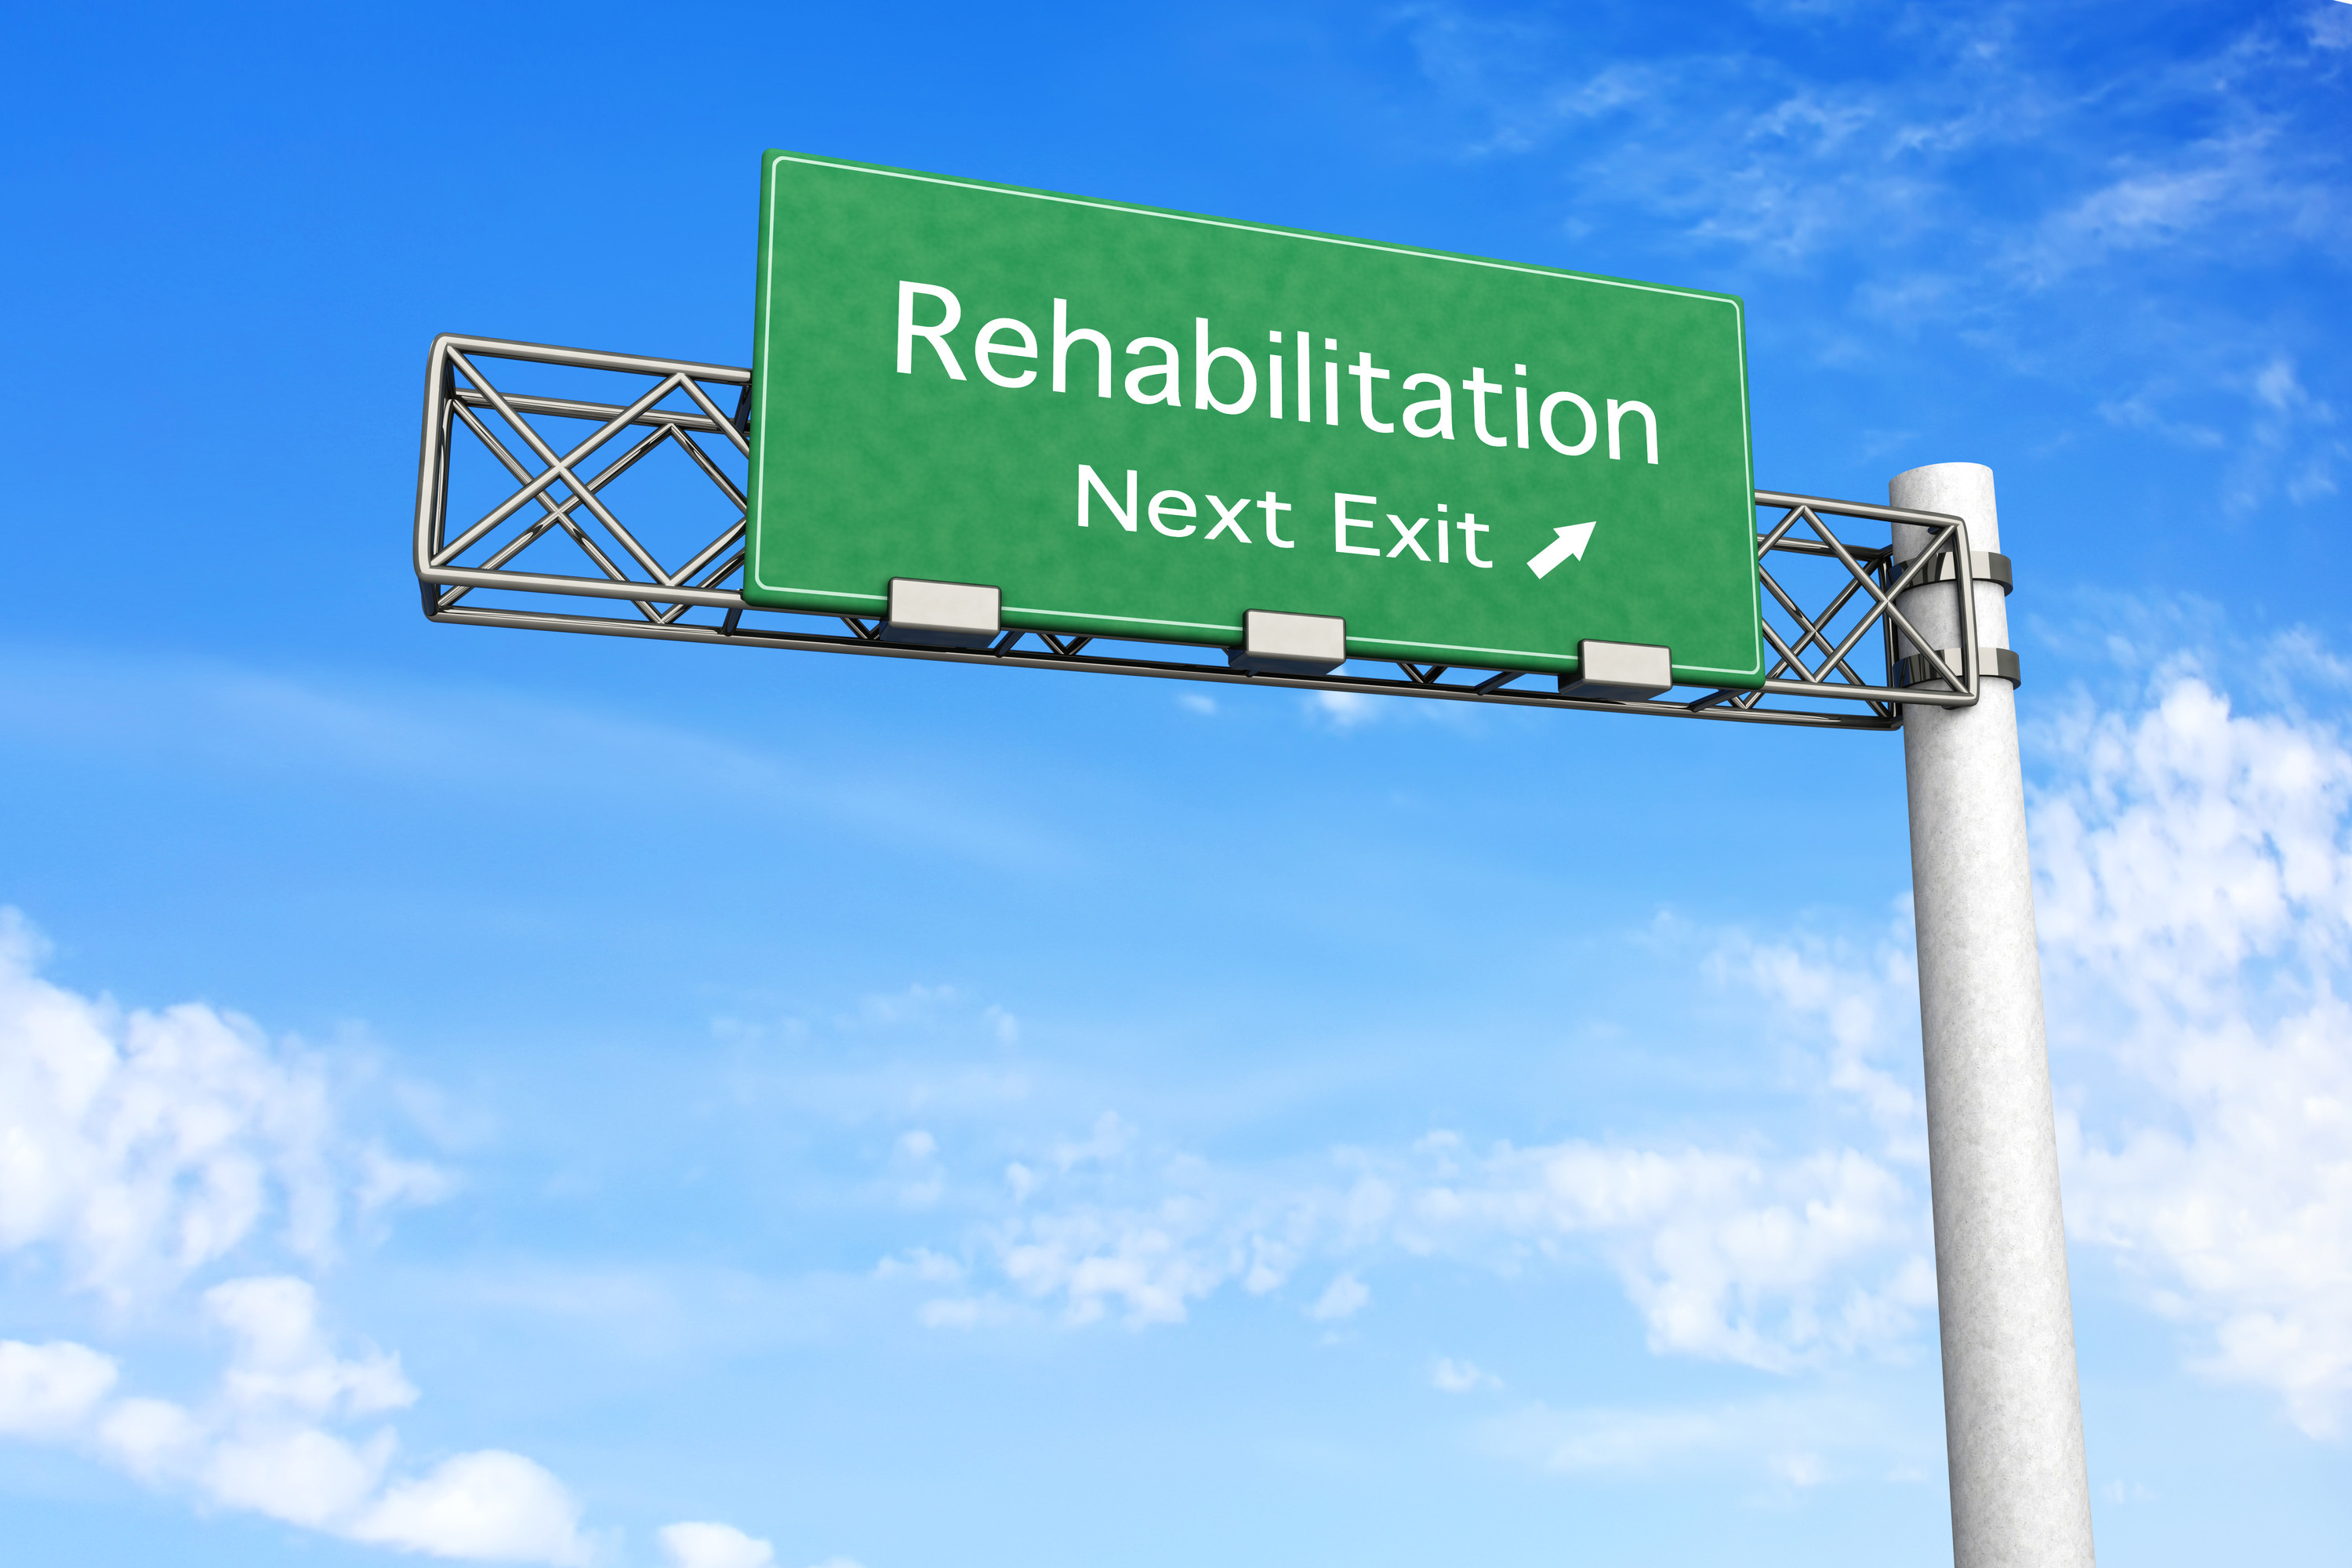 State Funded Drug Rehabs in Florida